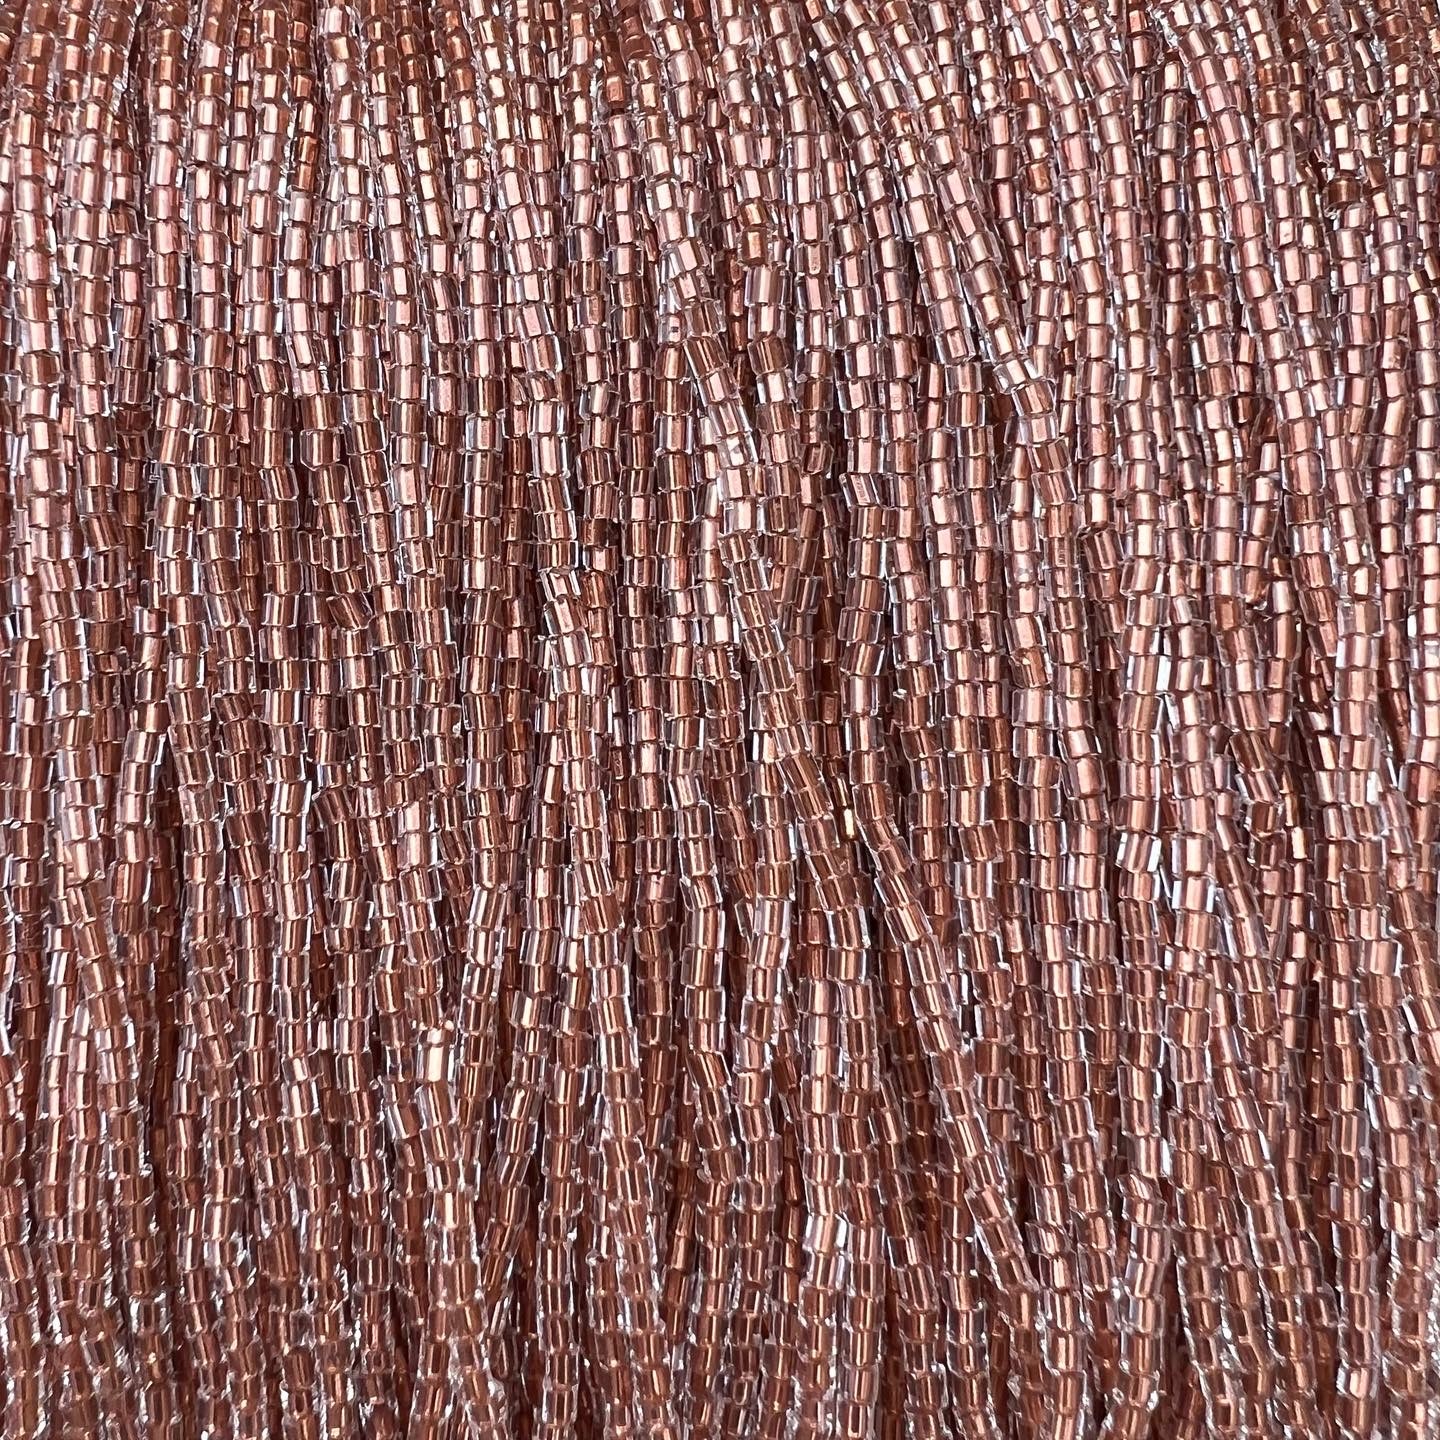 Size 11/0 2-Cut Hex Seed Beads- #847 Crystal Copper Lined - Capital City  Beads